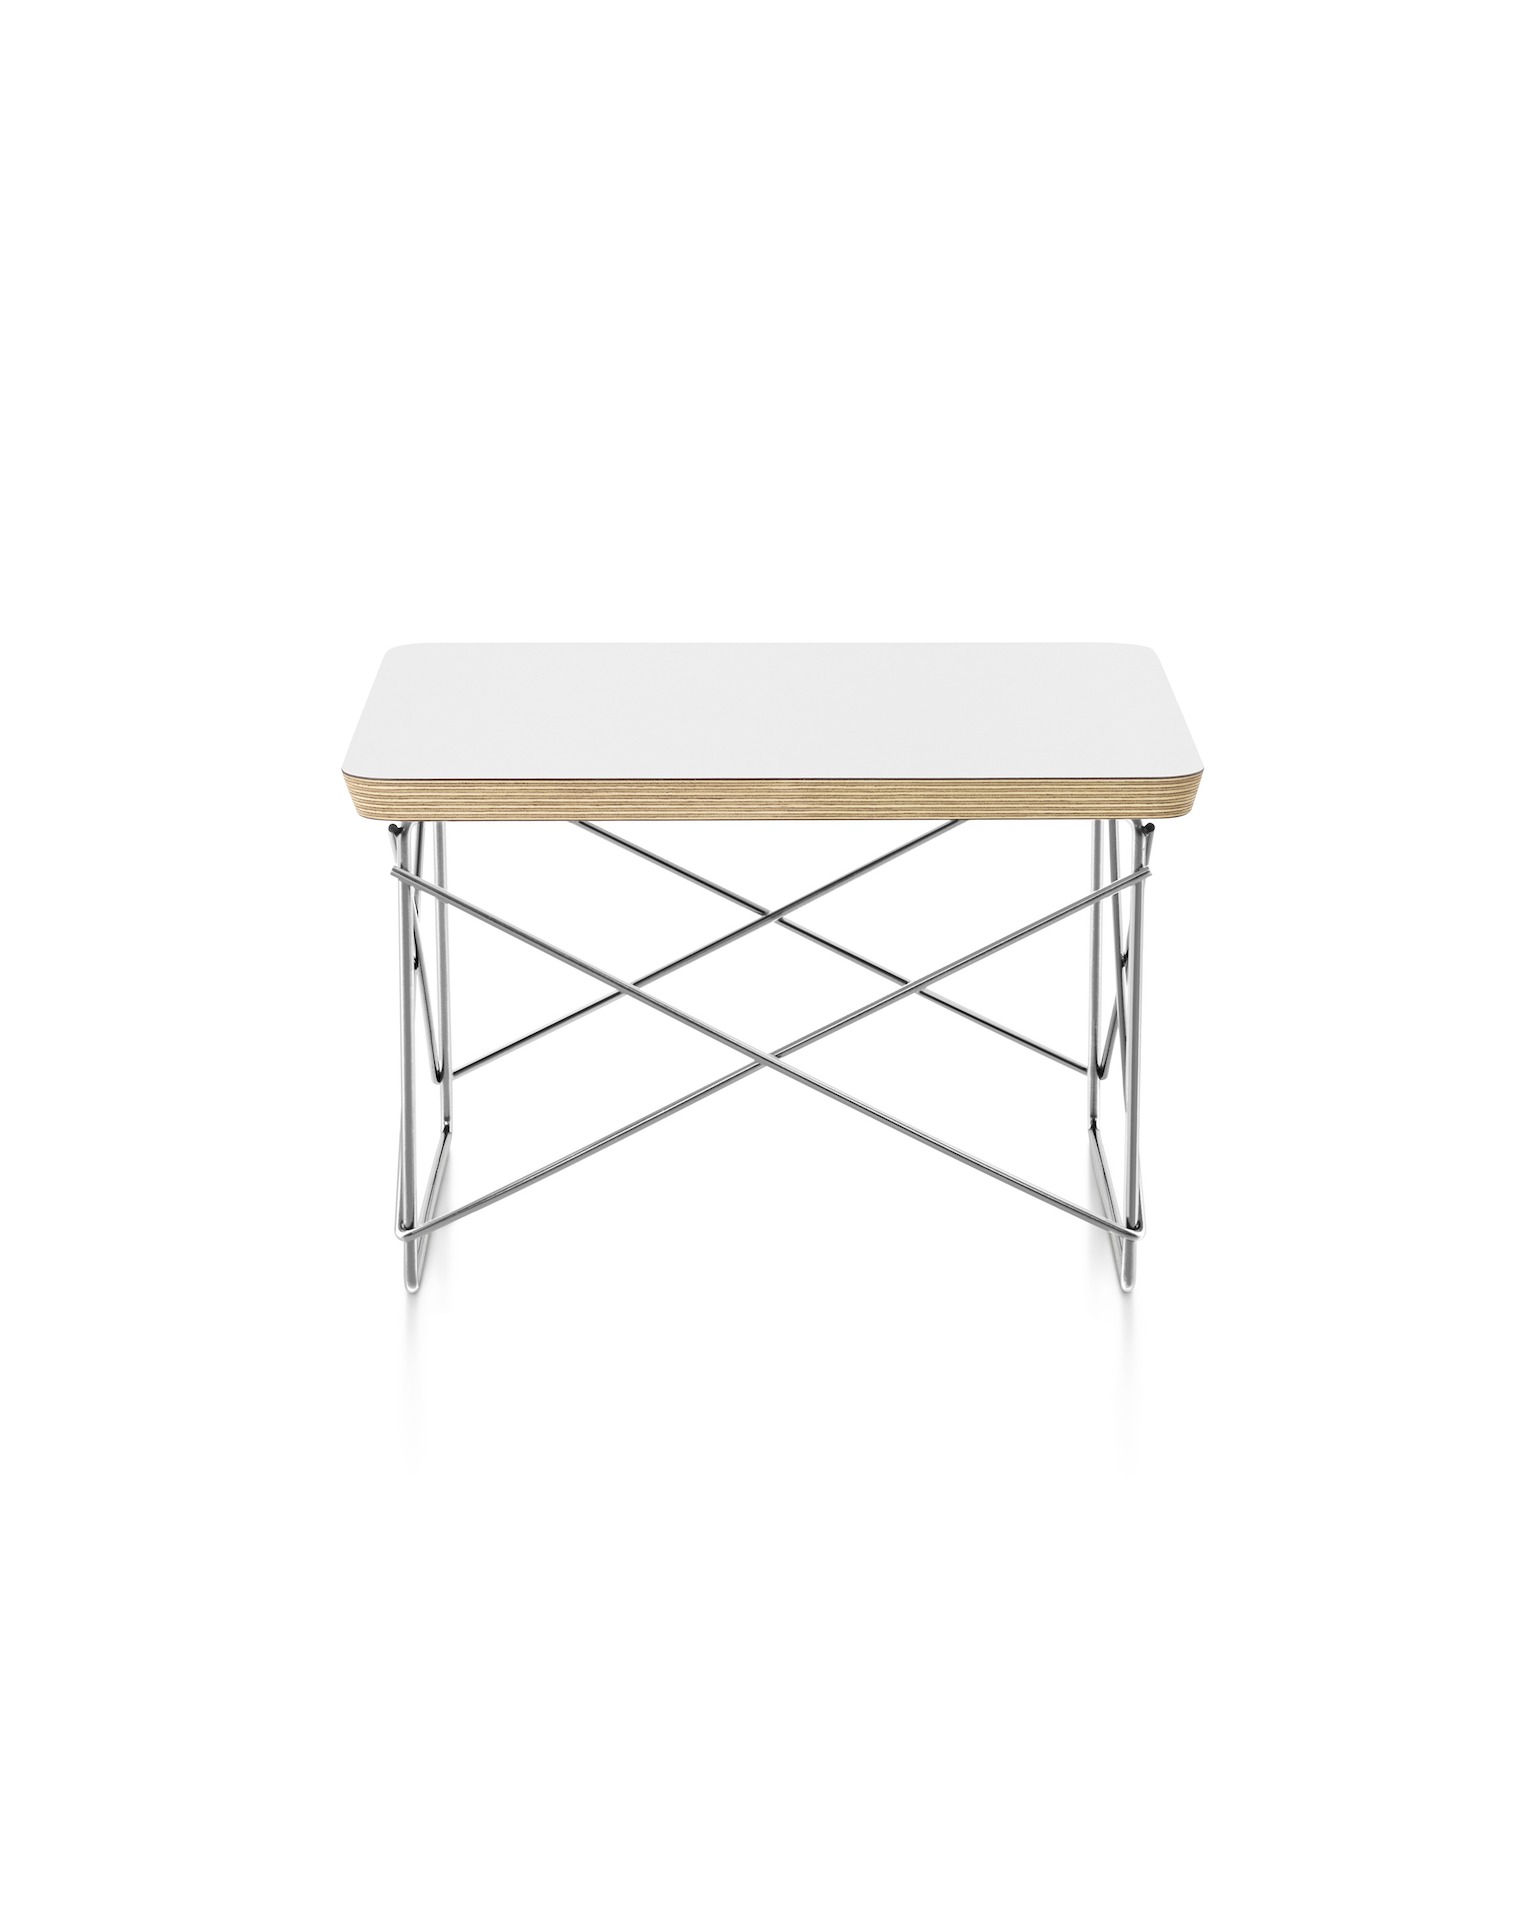 An Eames Wire Base Low Table, viewed from the front.